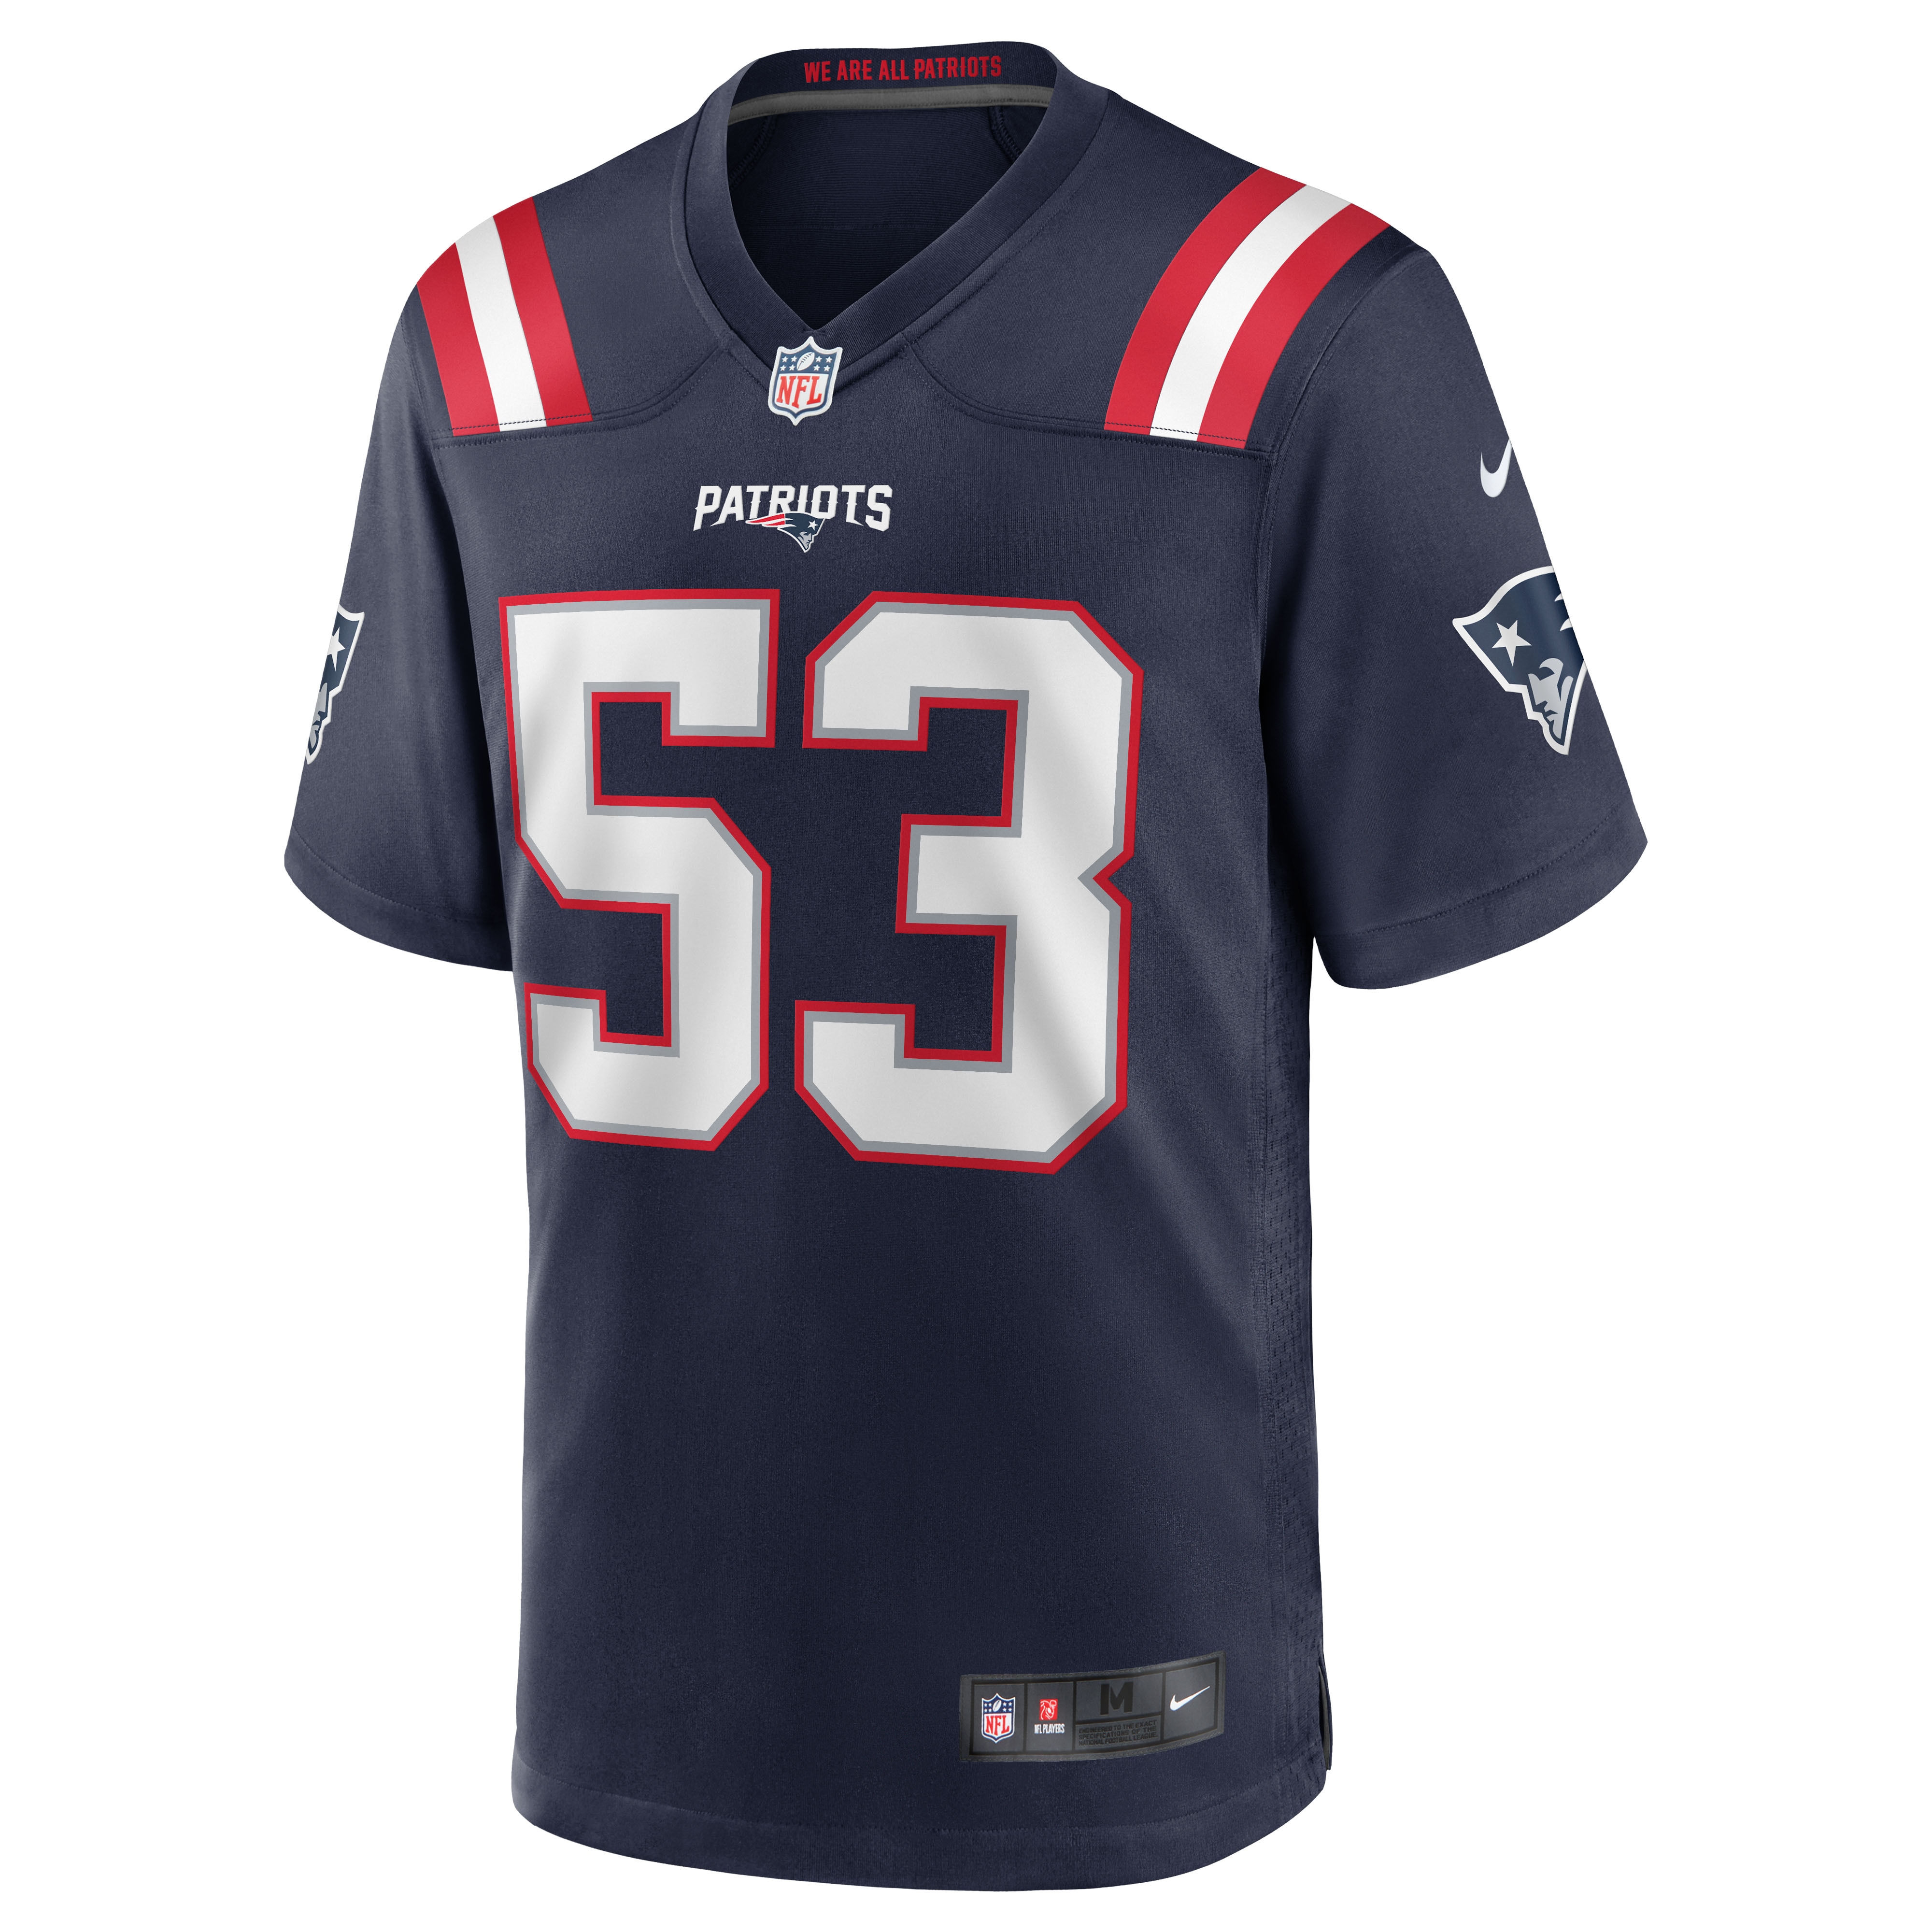 patriots color rush jersey for sale